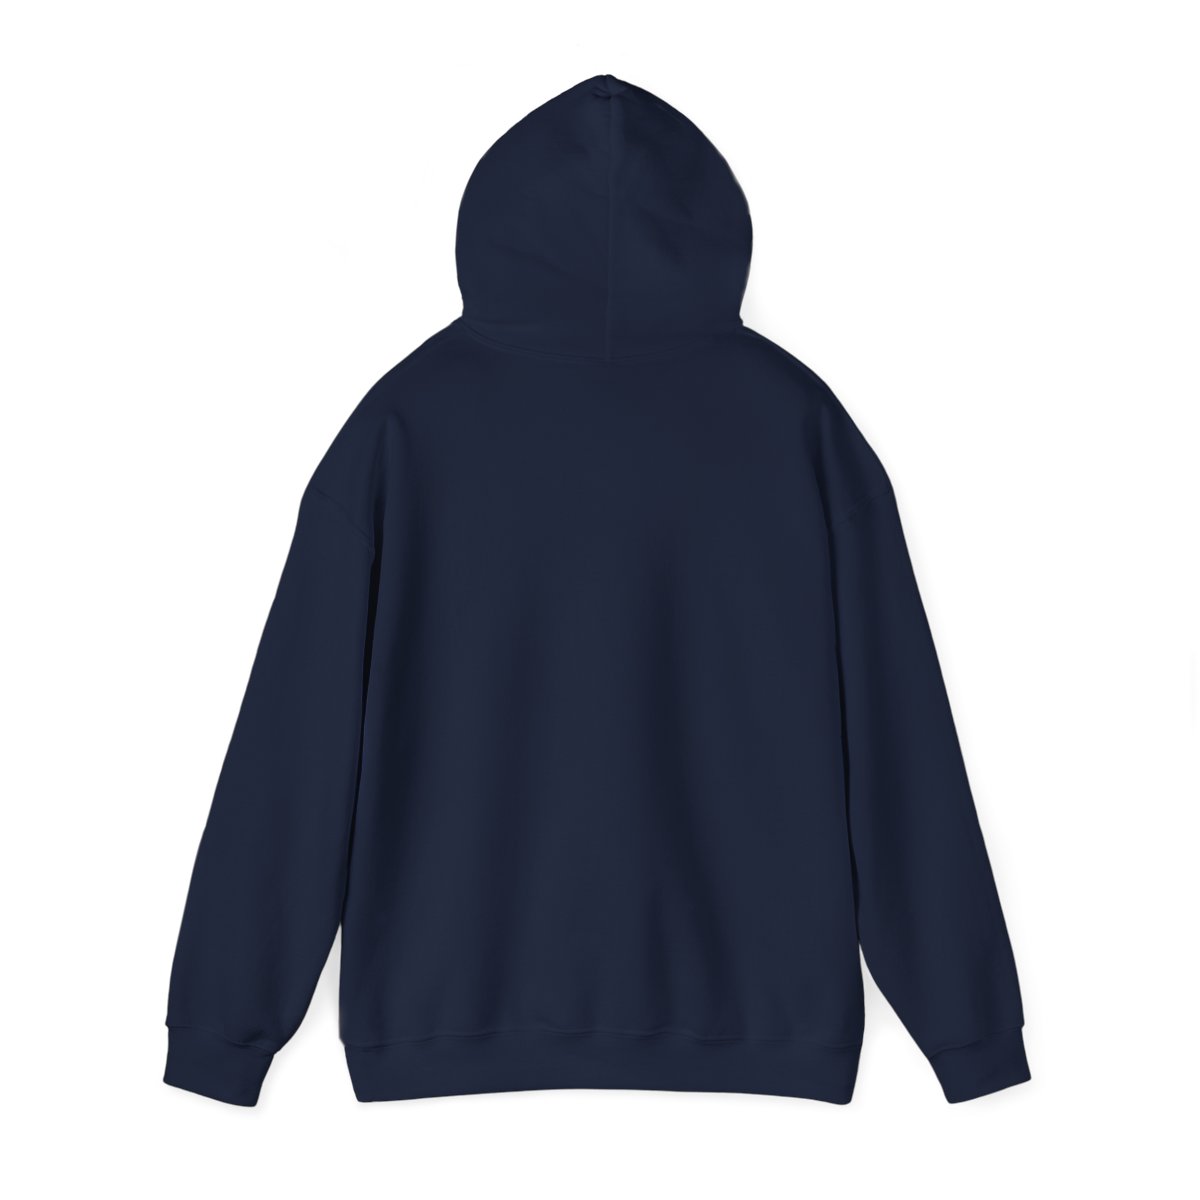 Legion Pullover Hoodie (Heavy Blend) product thumbnail image